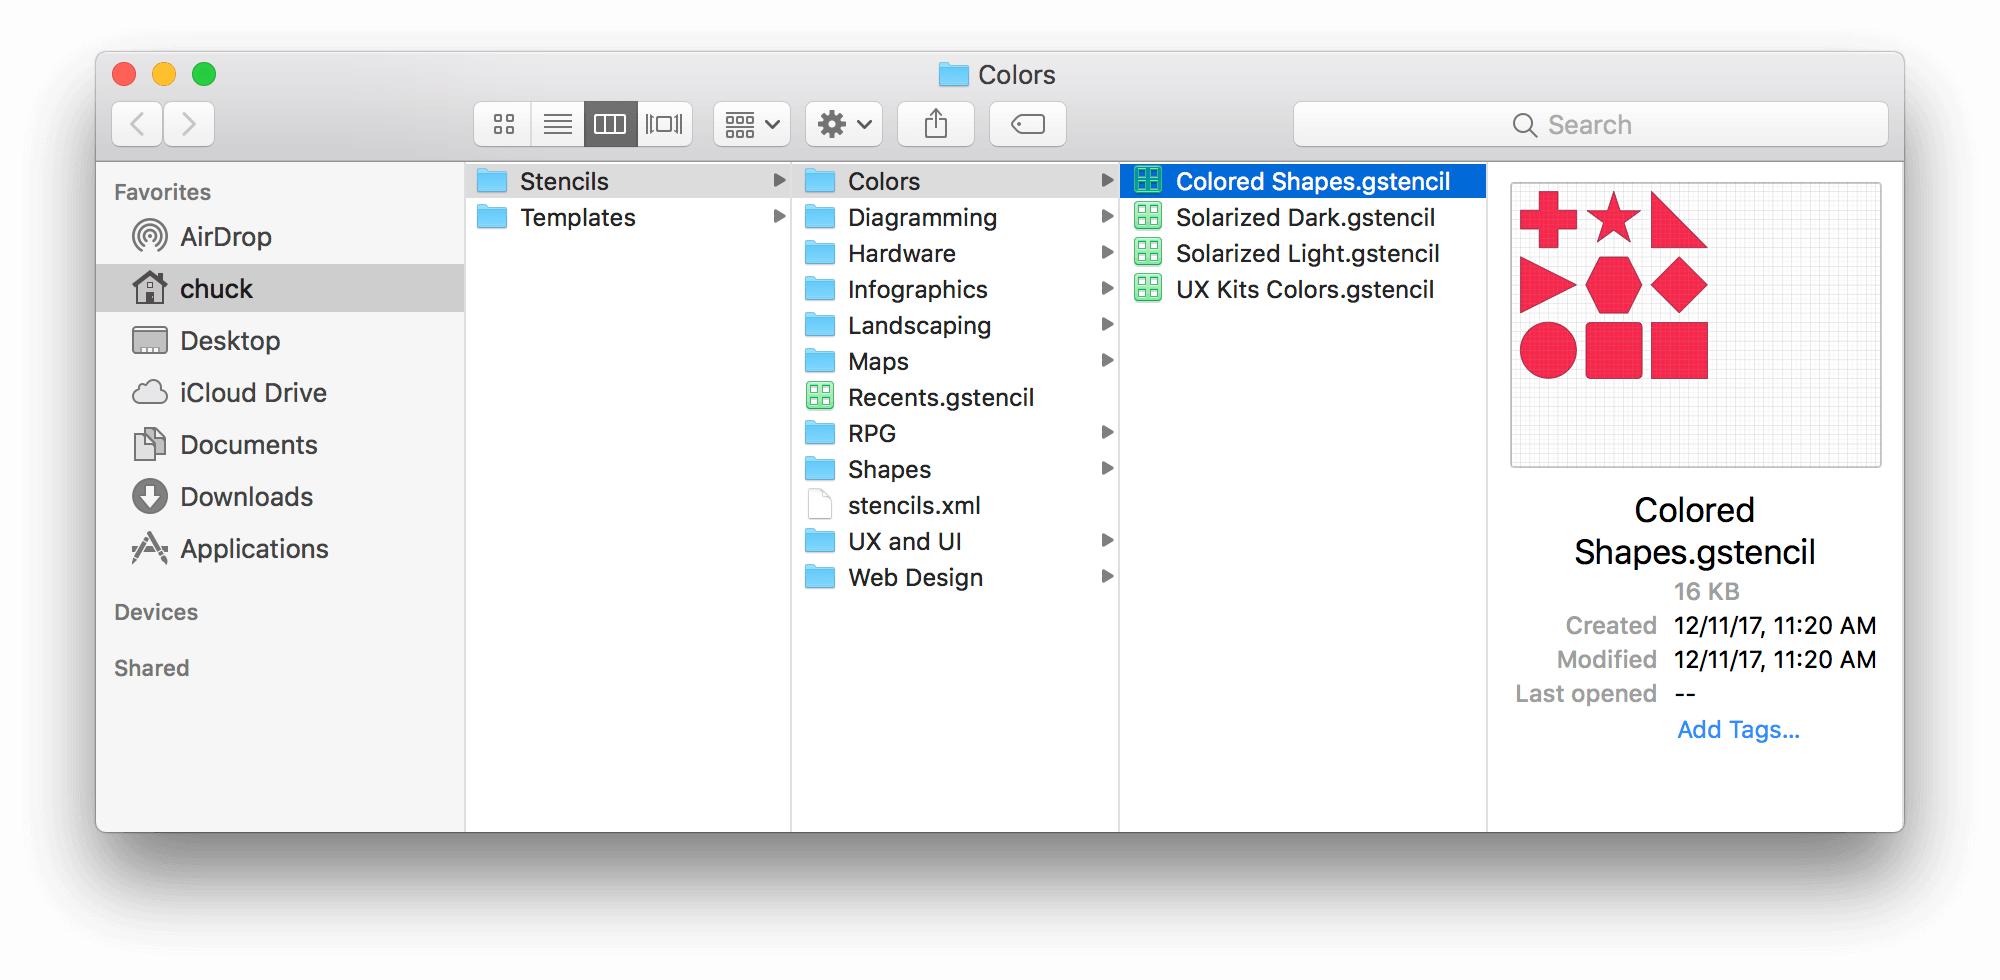 A Finder window, open to the Colors folder, within the Stencils folder.